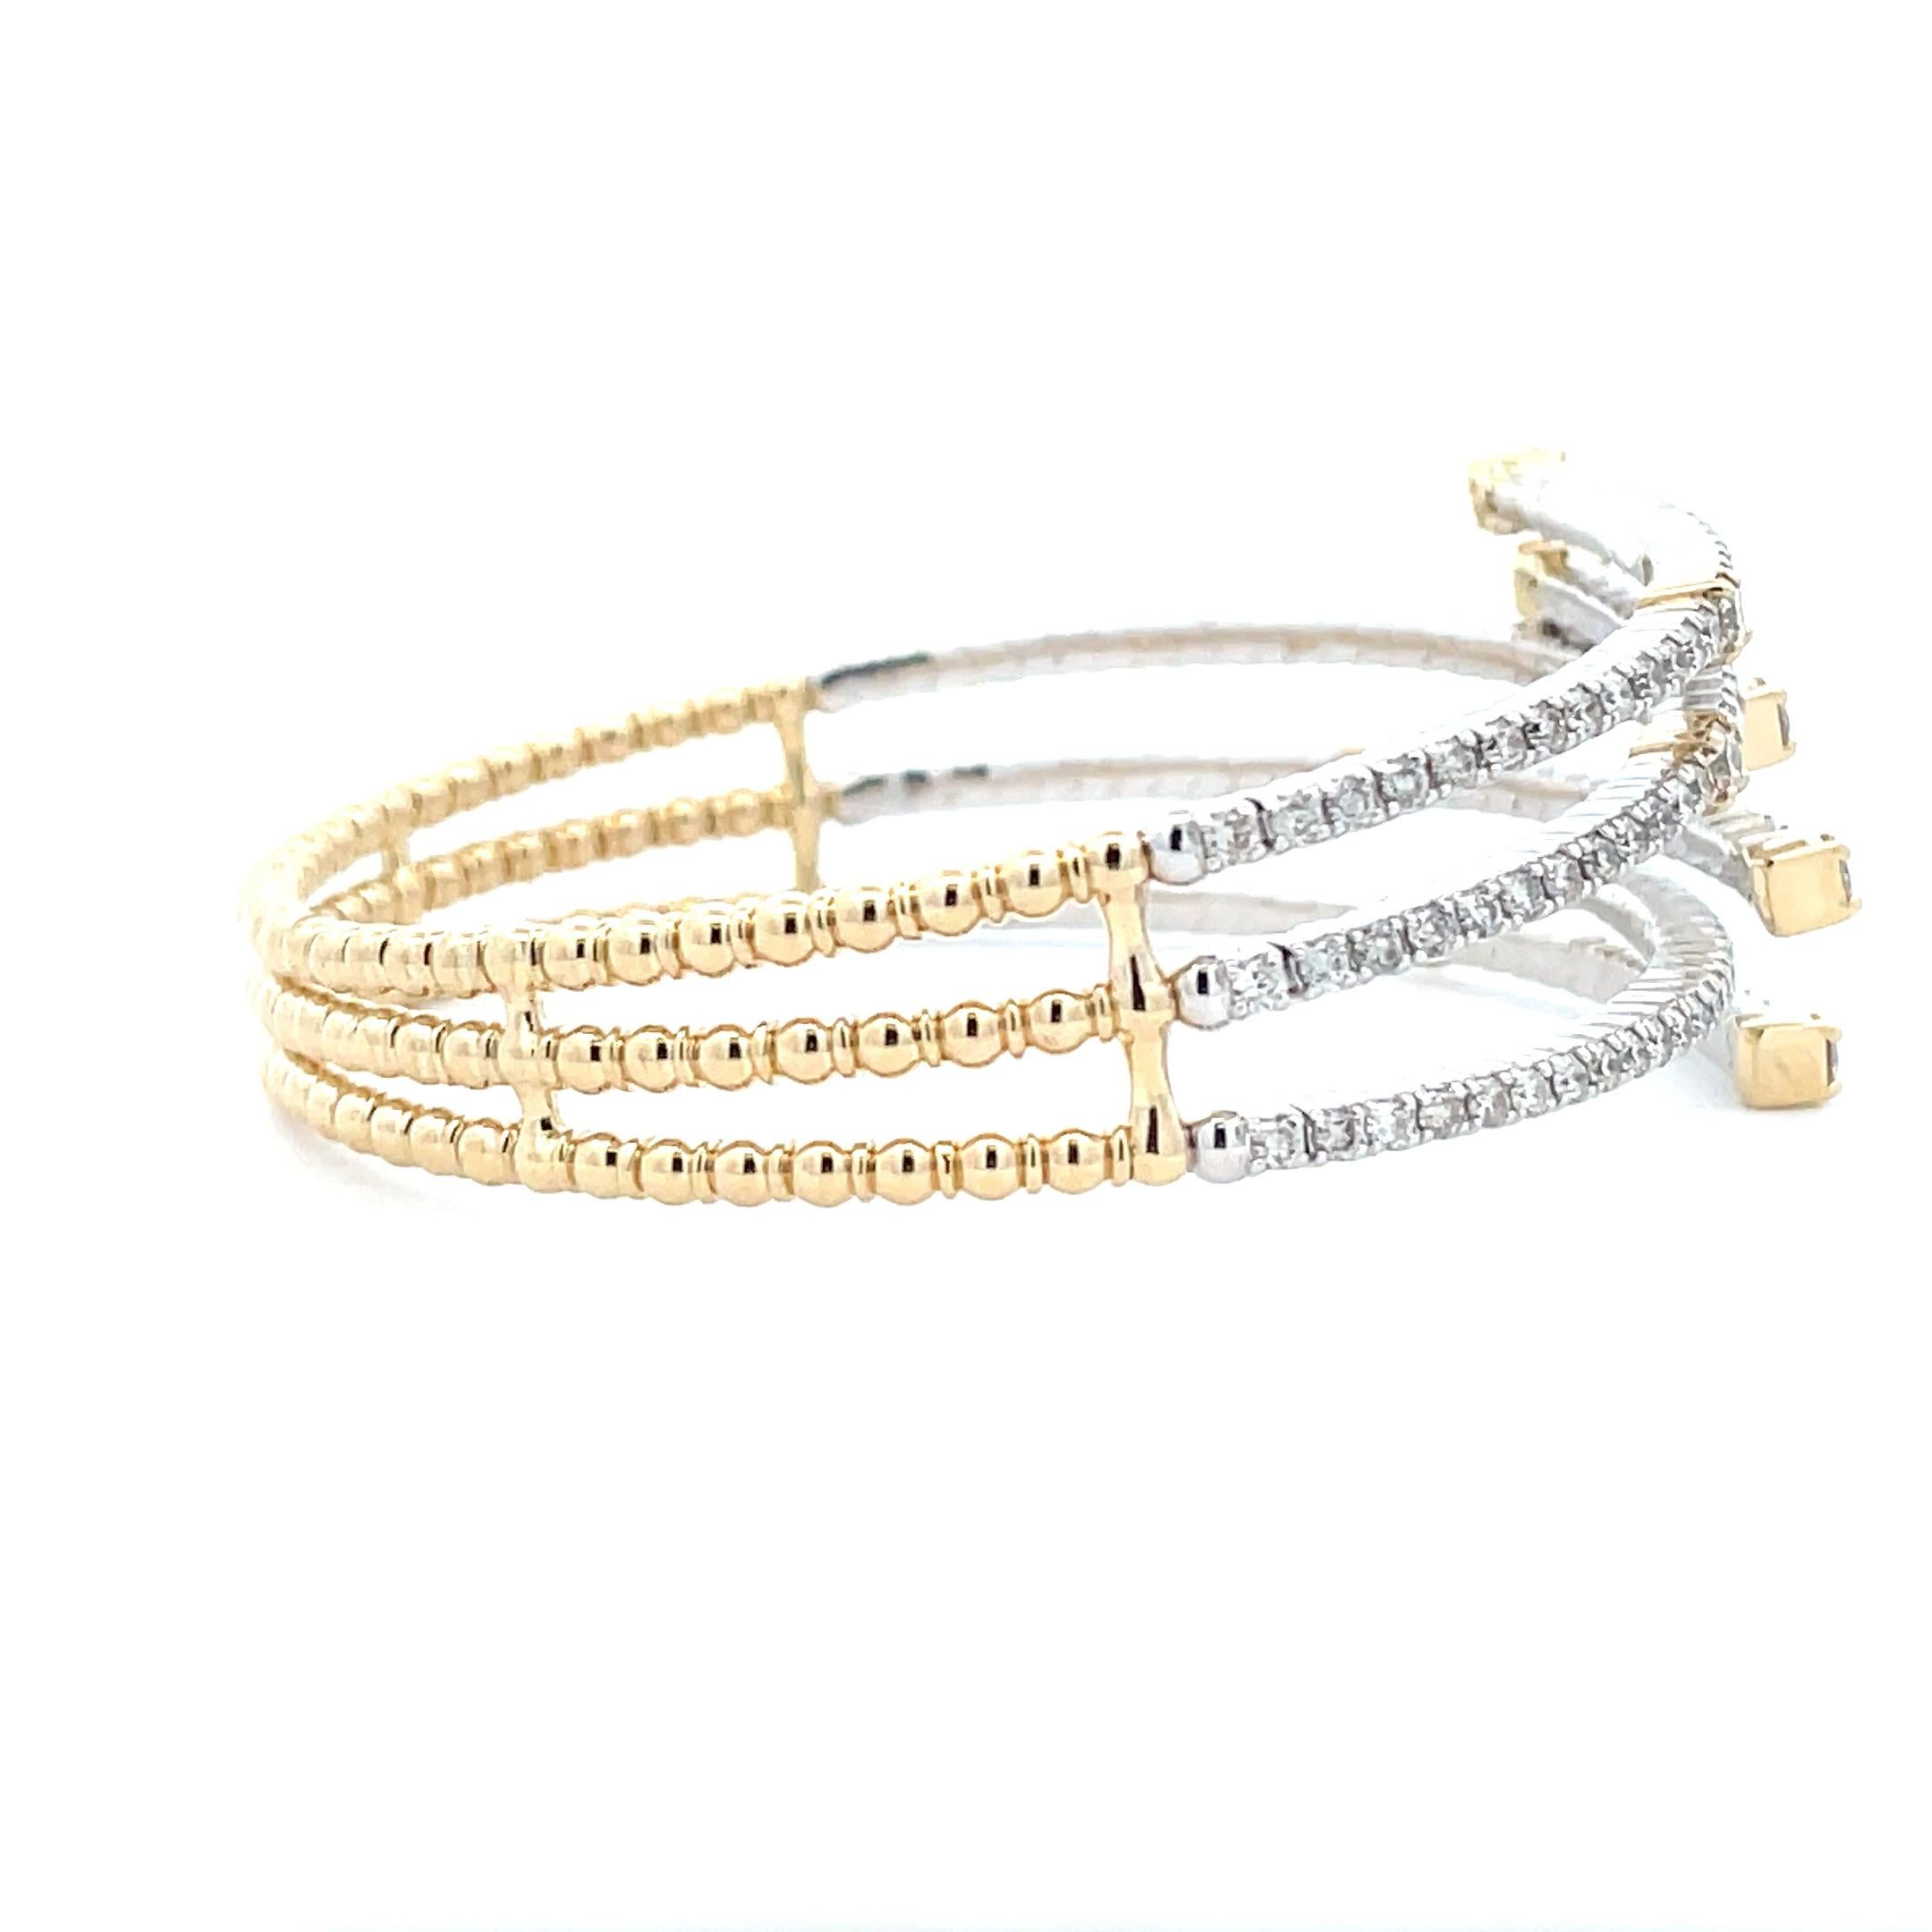 Designed and handcrafted by a professional artisan, our Beaded Diamond Bangle is crafted from 14K Yellow Gold and White Gold, creating a beautiful two-tone effect. The sophisticated multi- strand design makes this the ultimate statement piece in any